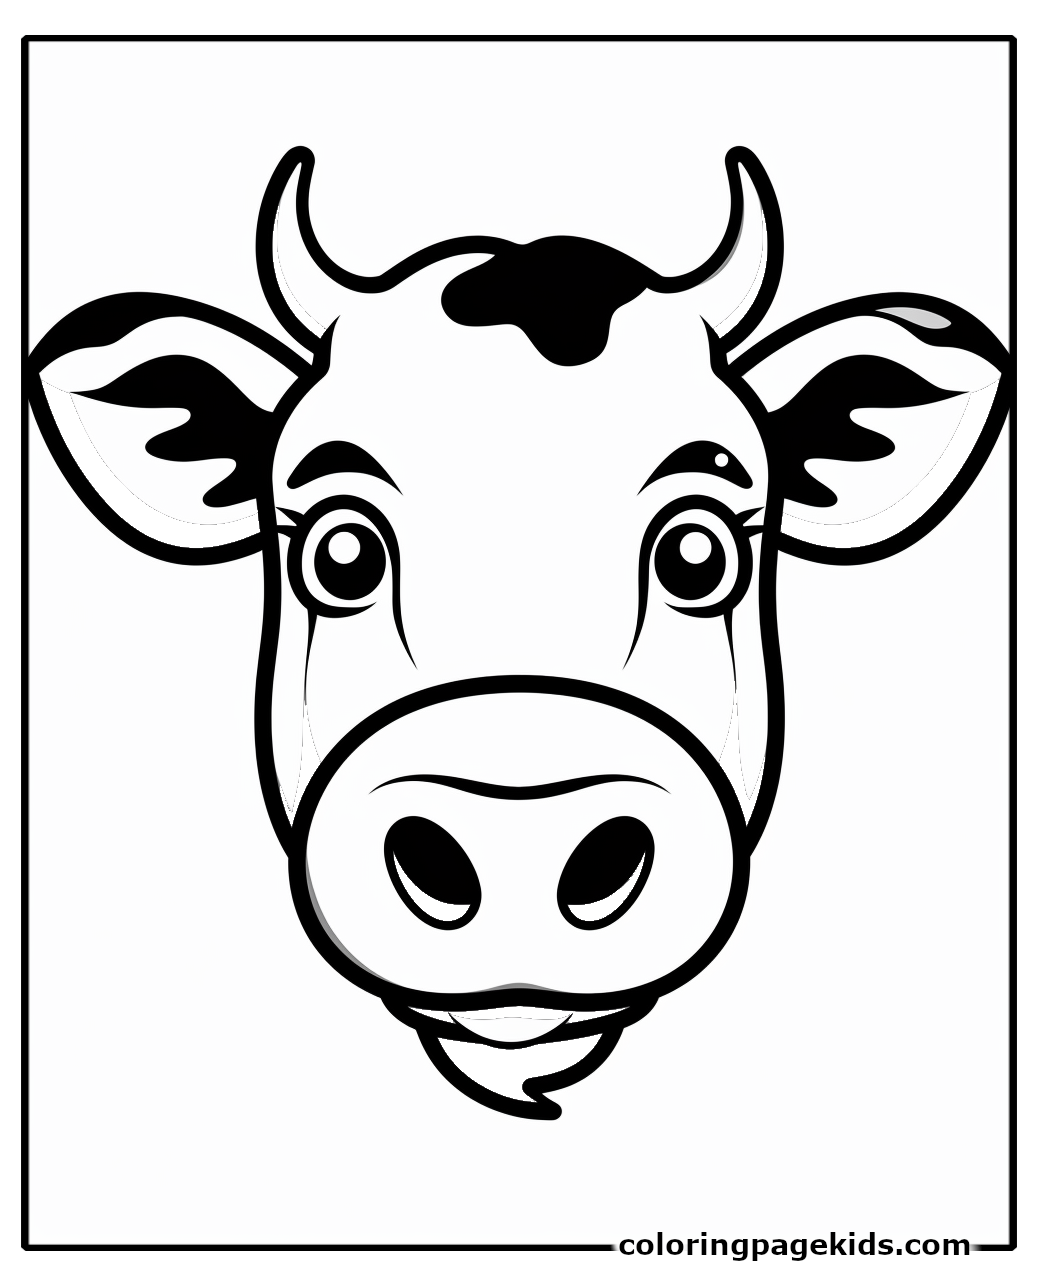 12 Perfect Printable Cow Masks for You